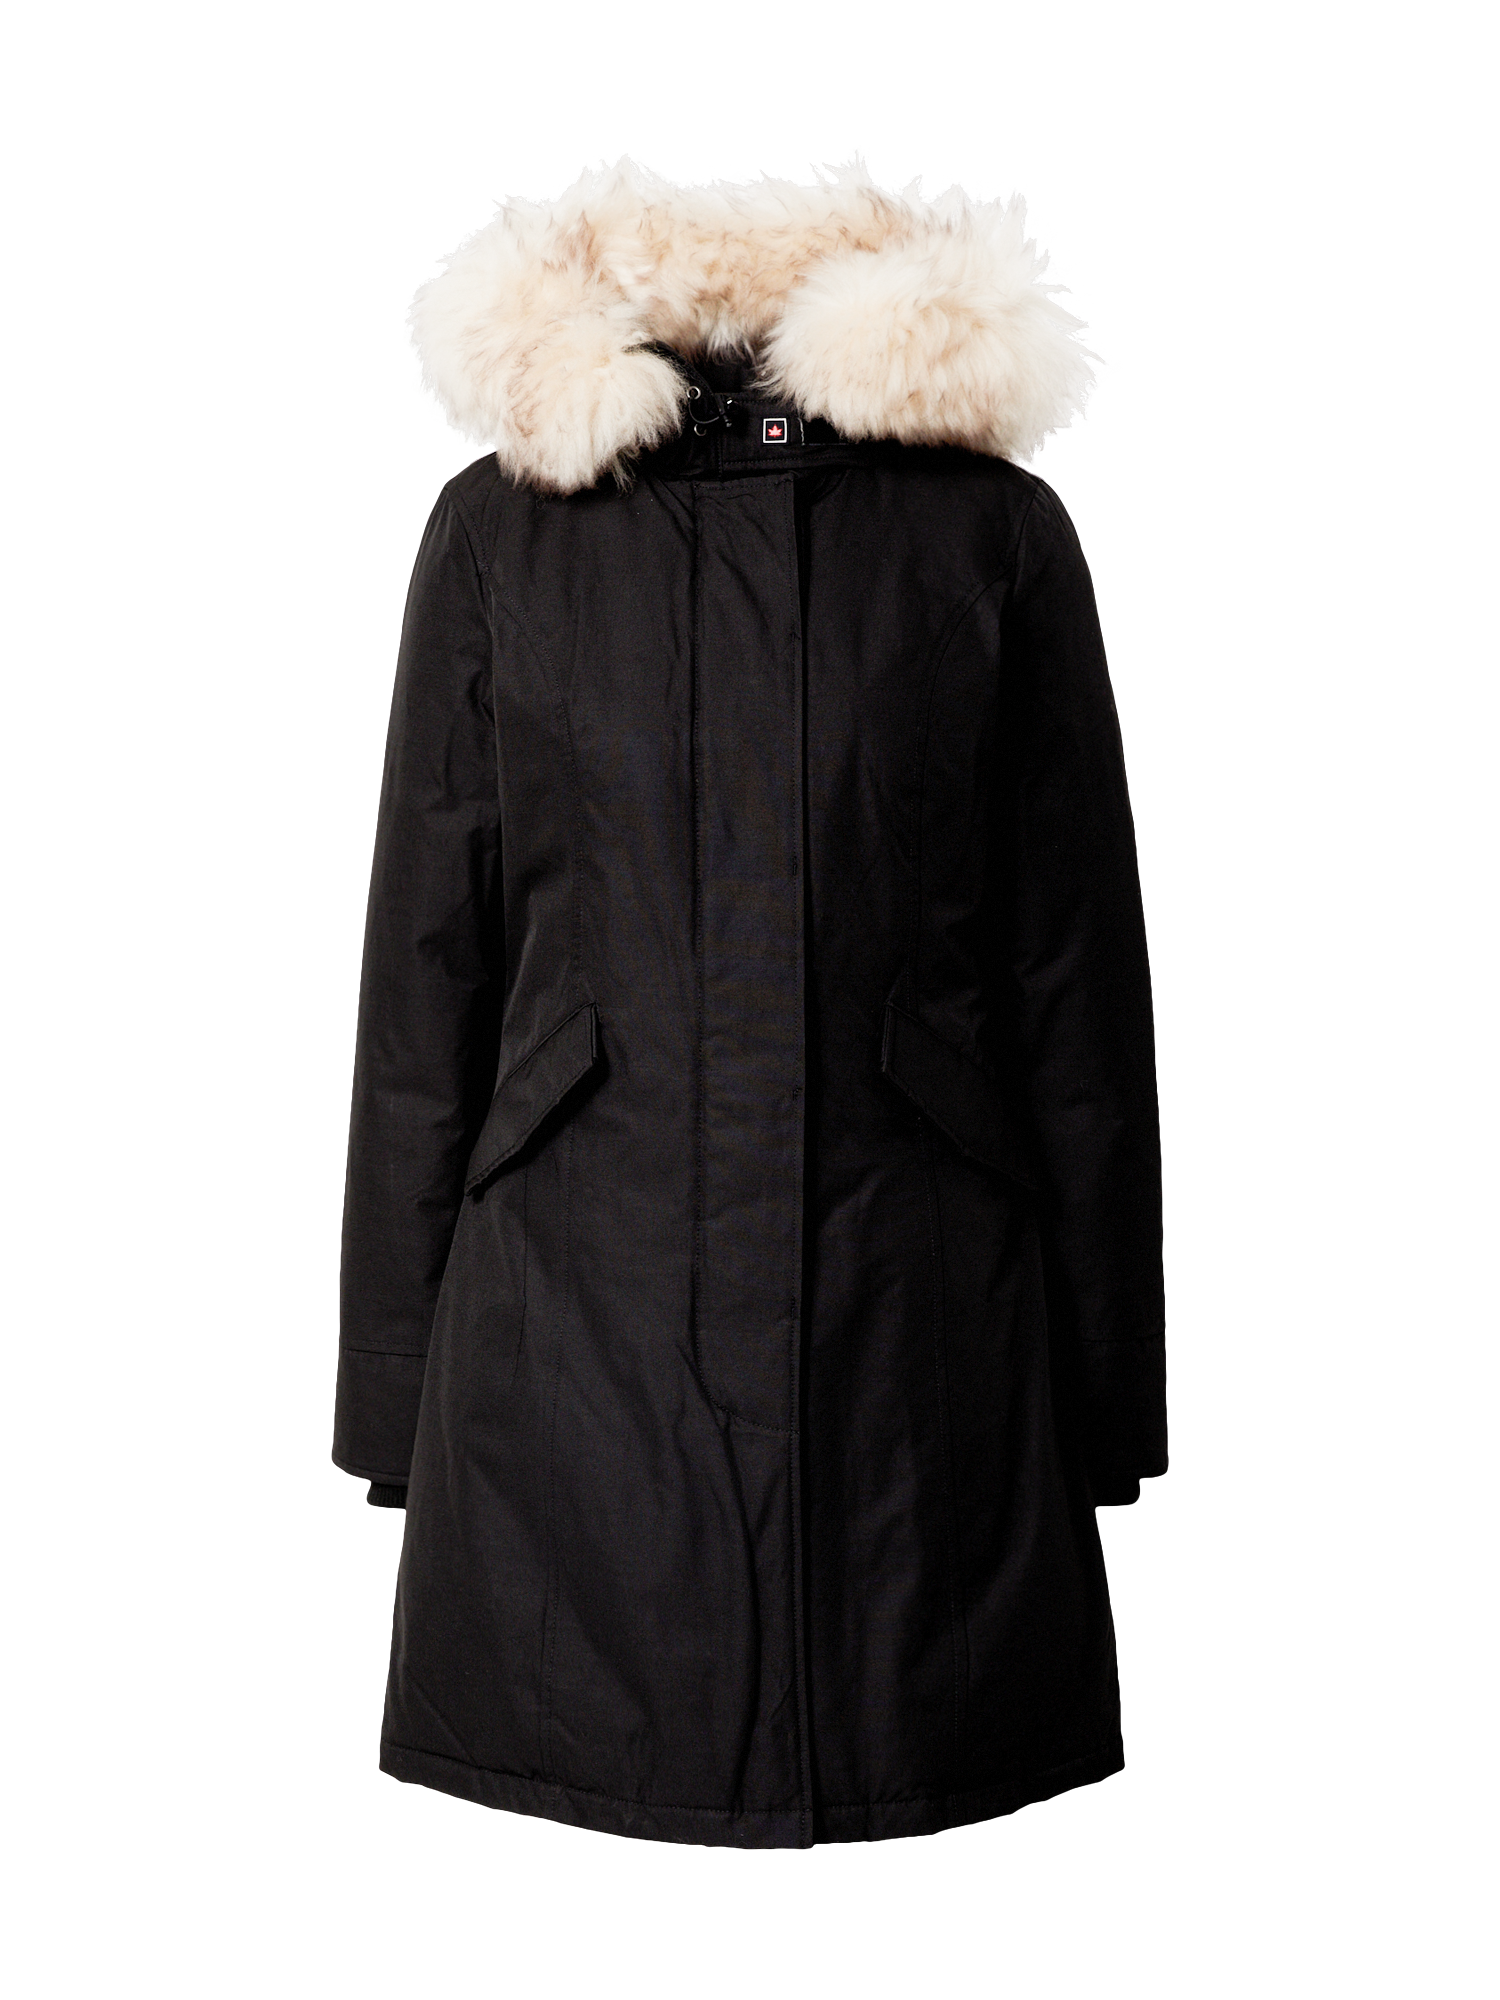 Premium Donna Canadian Classics Parka invernale GIACCA DONNA FUNDYBAY in Nero 